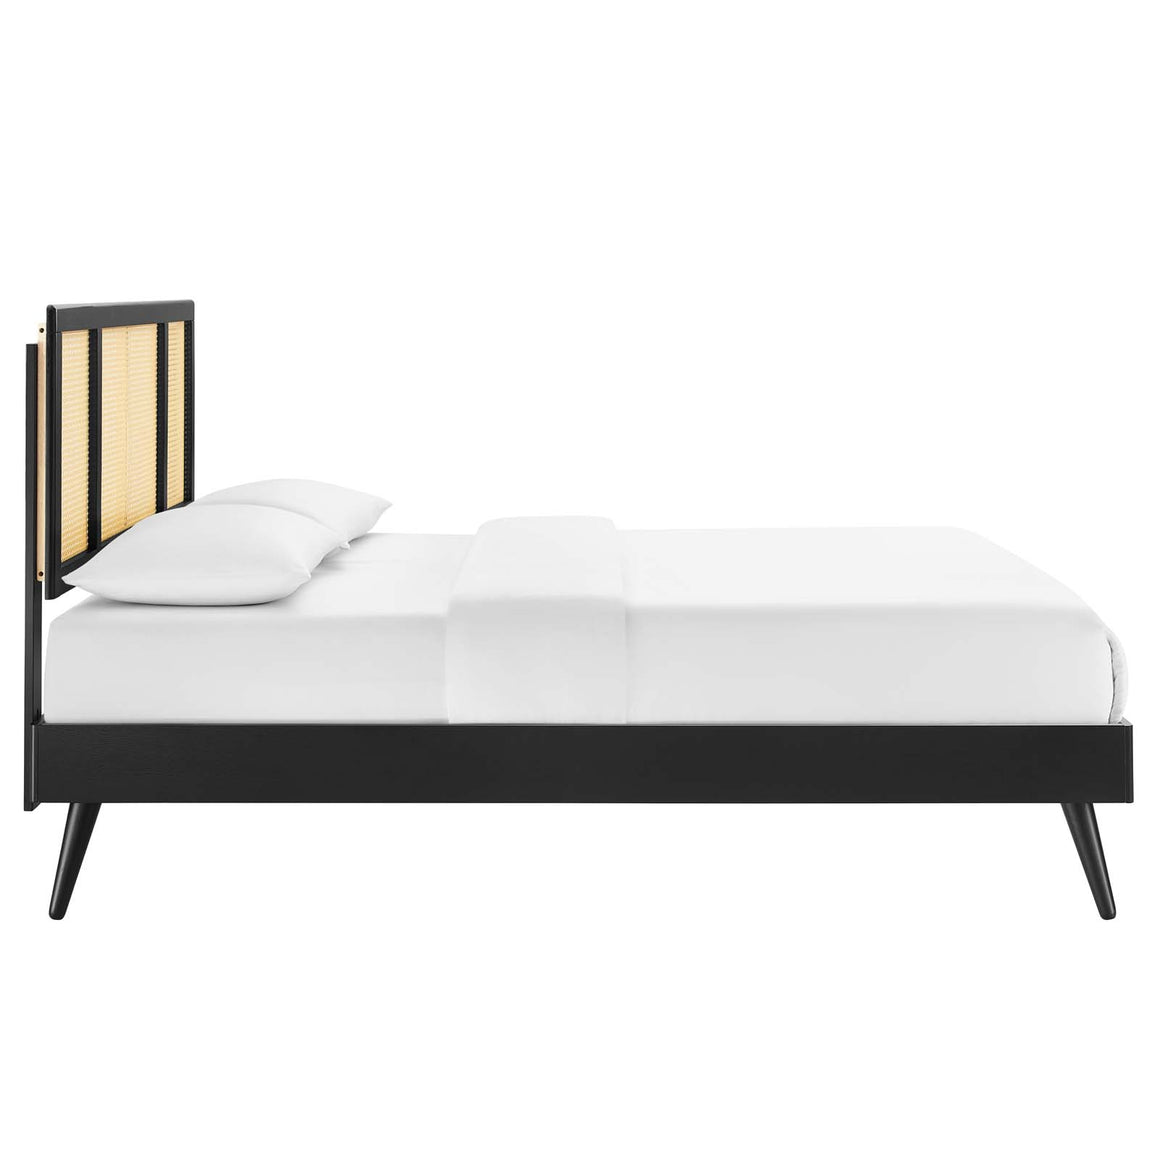 Kelsea Cane and Wood Platform Bed With Splayed Legs